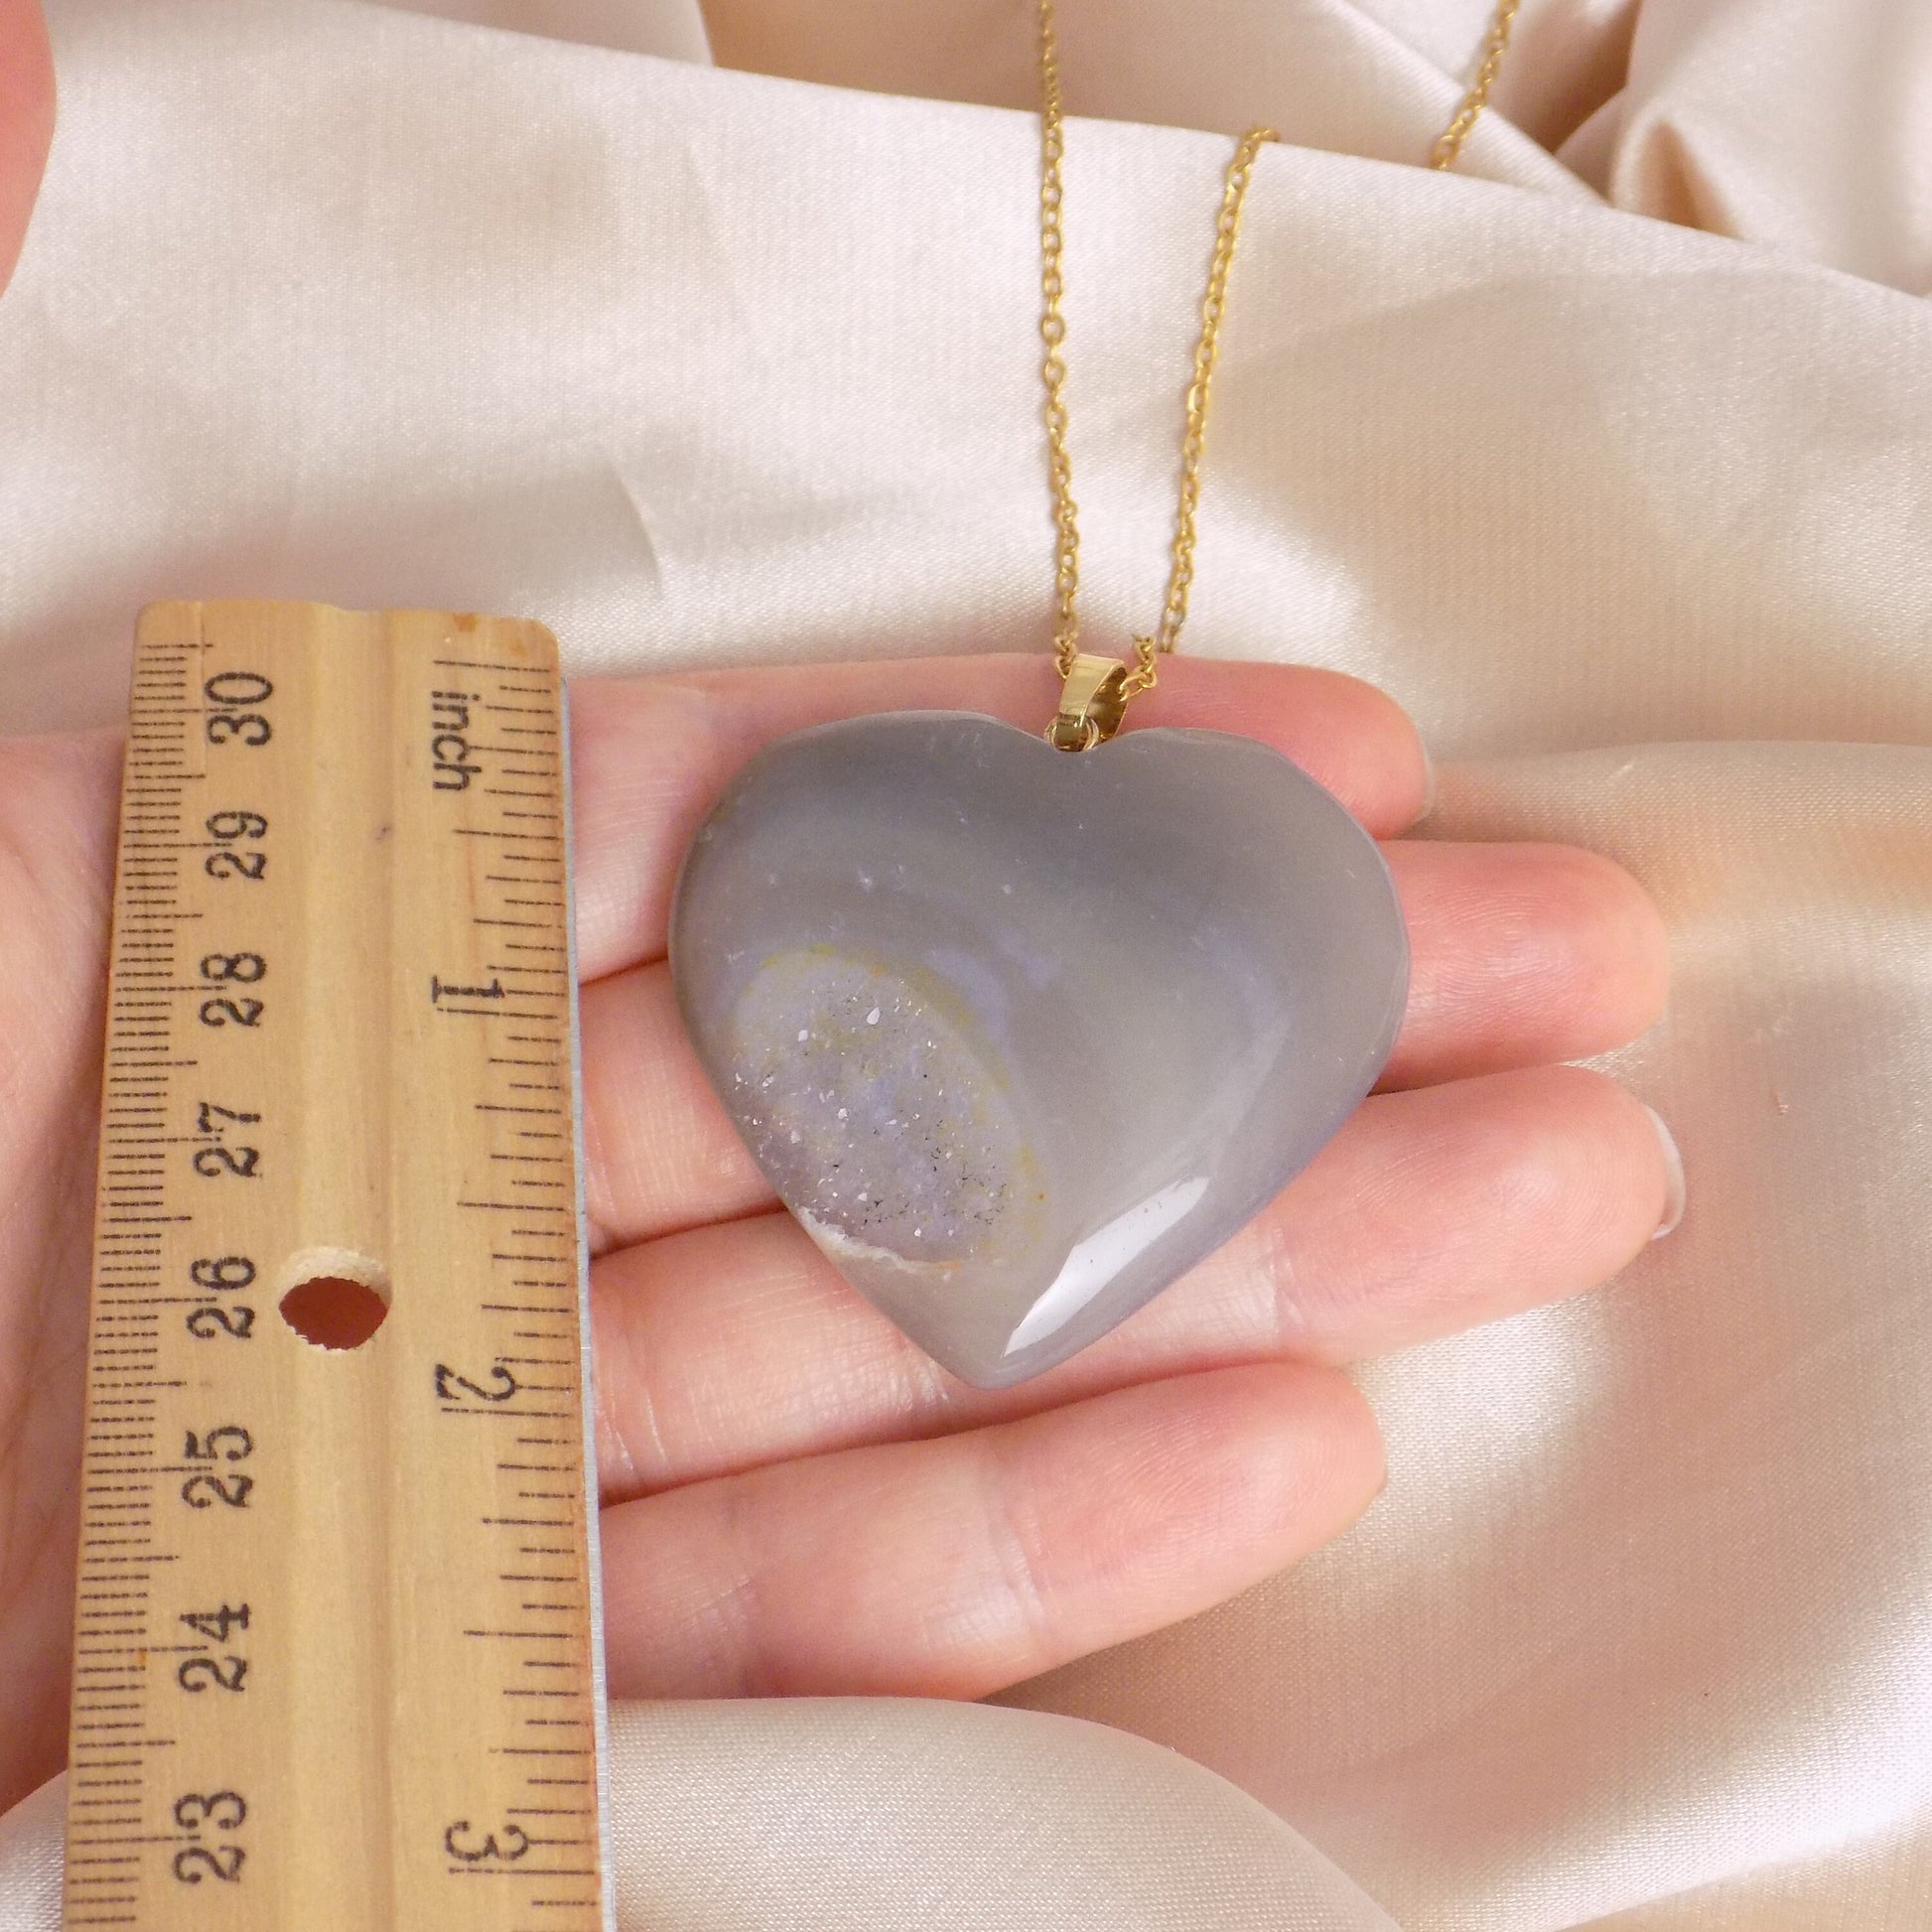 Large Geode Necklace Gold, Unique Iridescent Heart Crystal Jewelry Boho, Gift For Her, M7-298